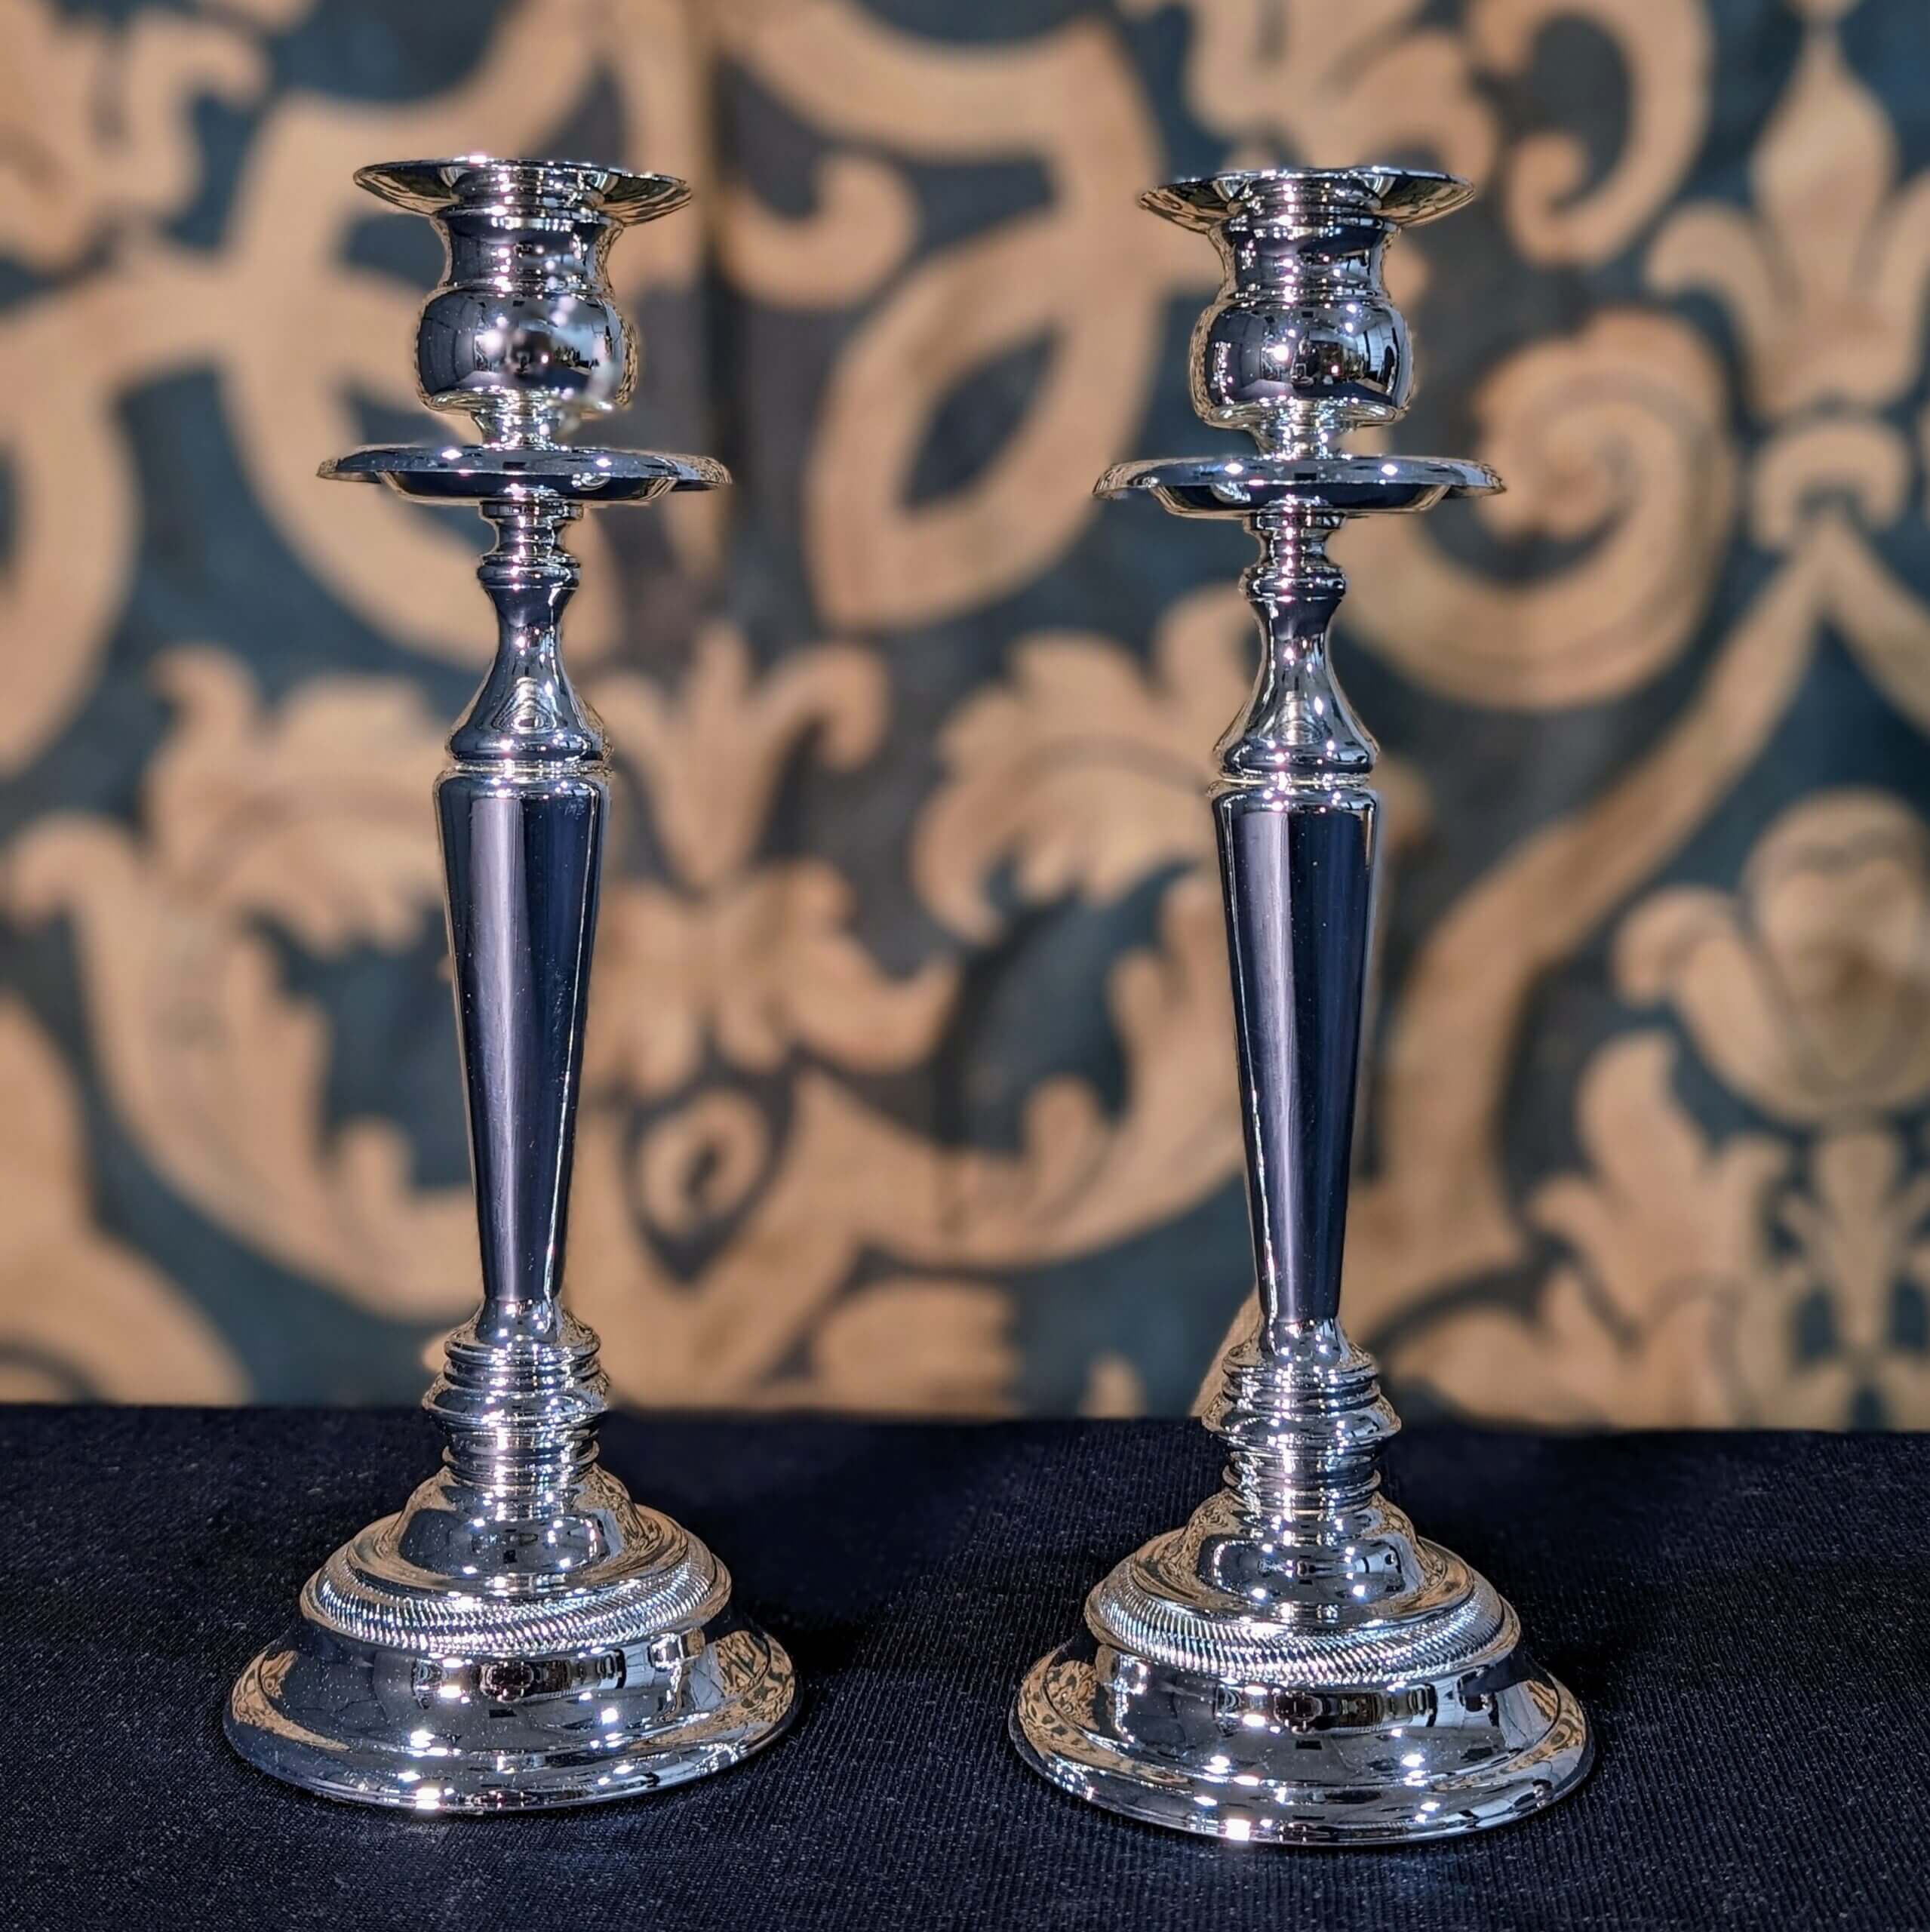 Elegant Pair of Altar Candlesticks from the 18th Century